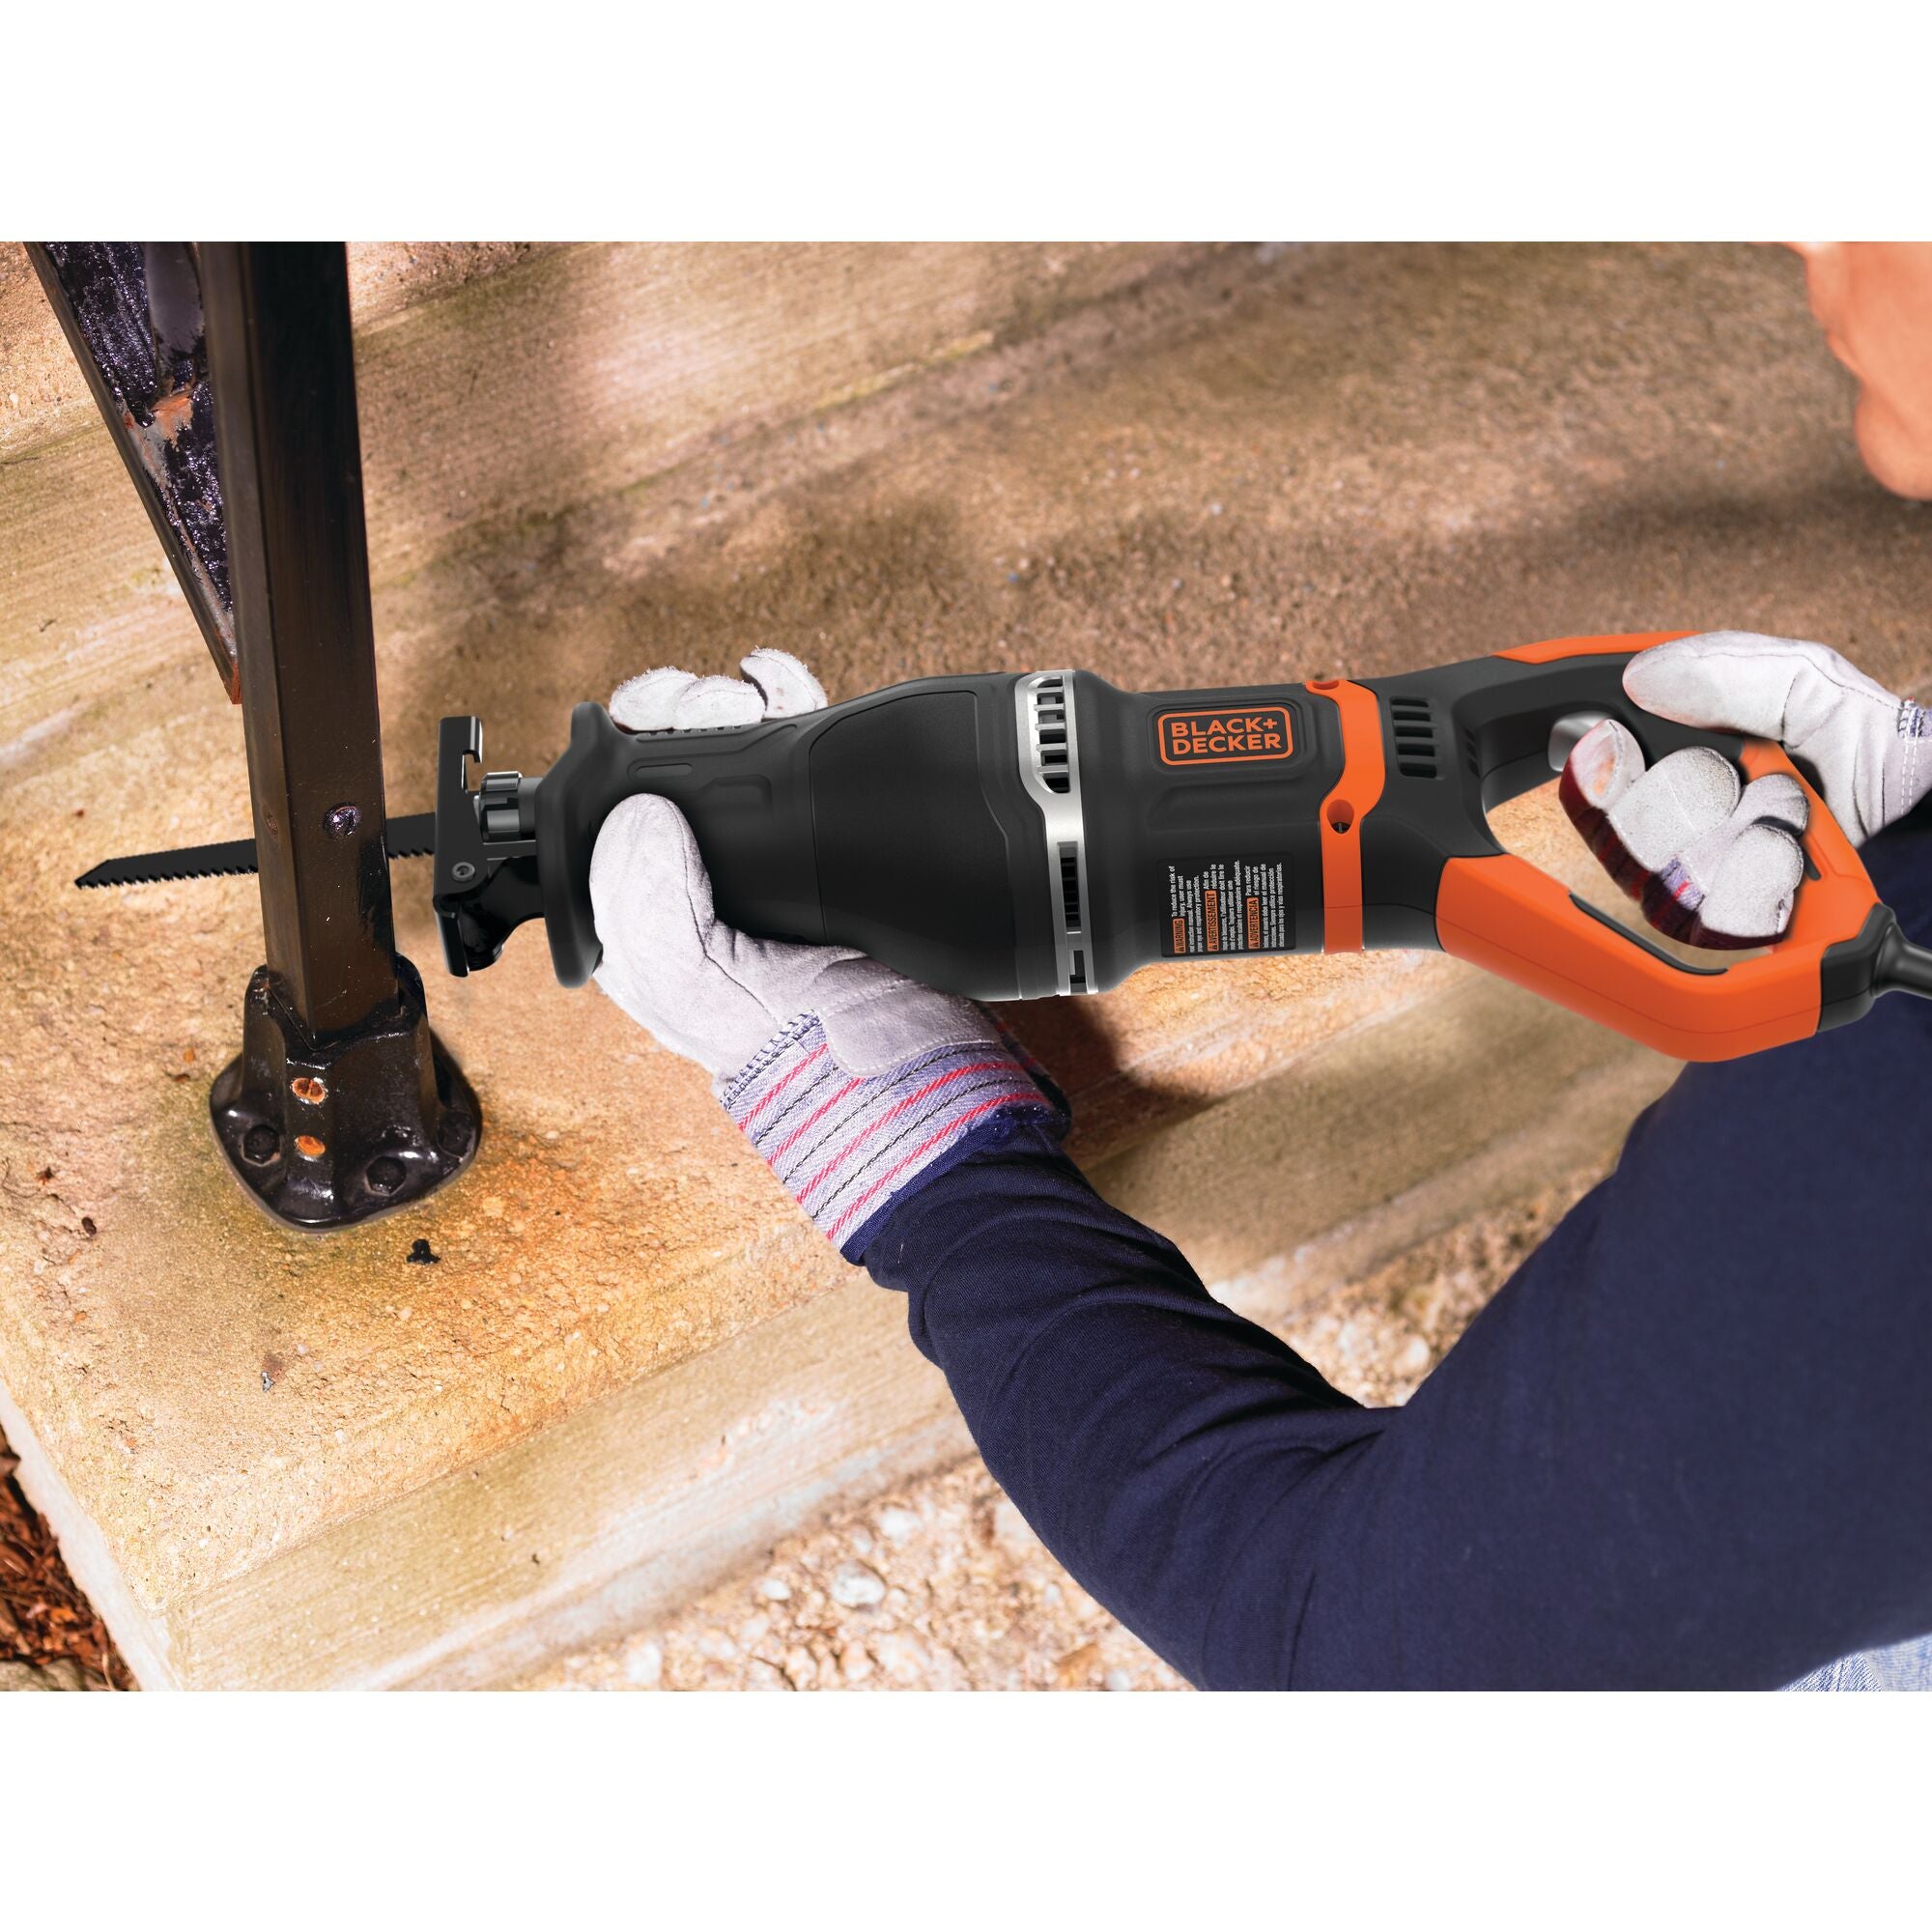 750W Corded Reciprocating Saw with Branch Holder and 2x Blades in Kit Box